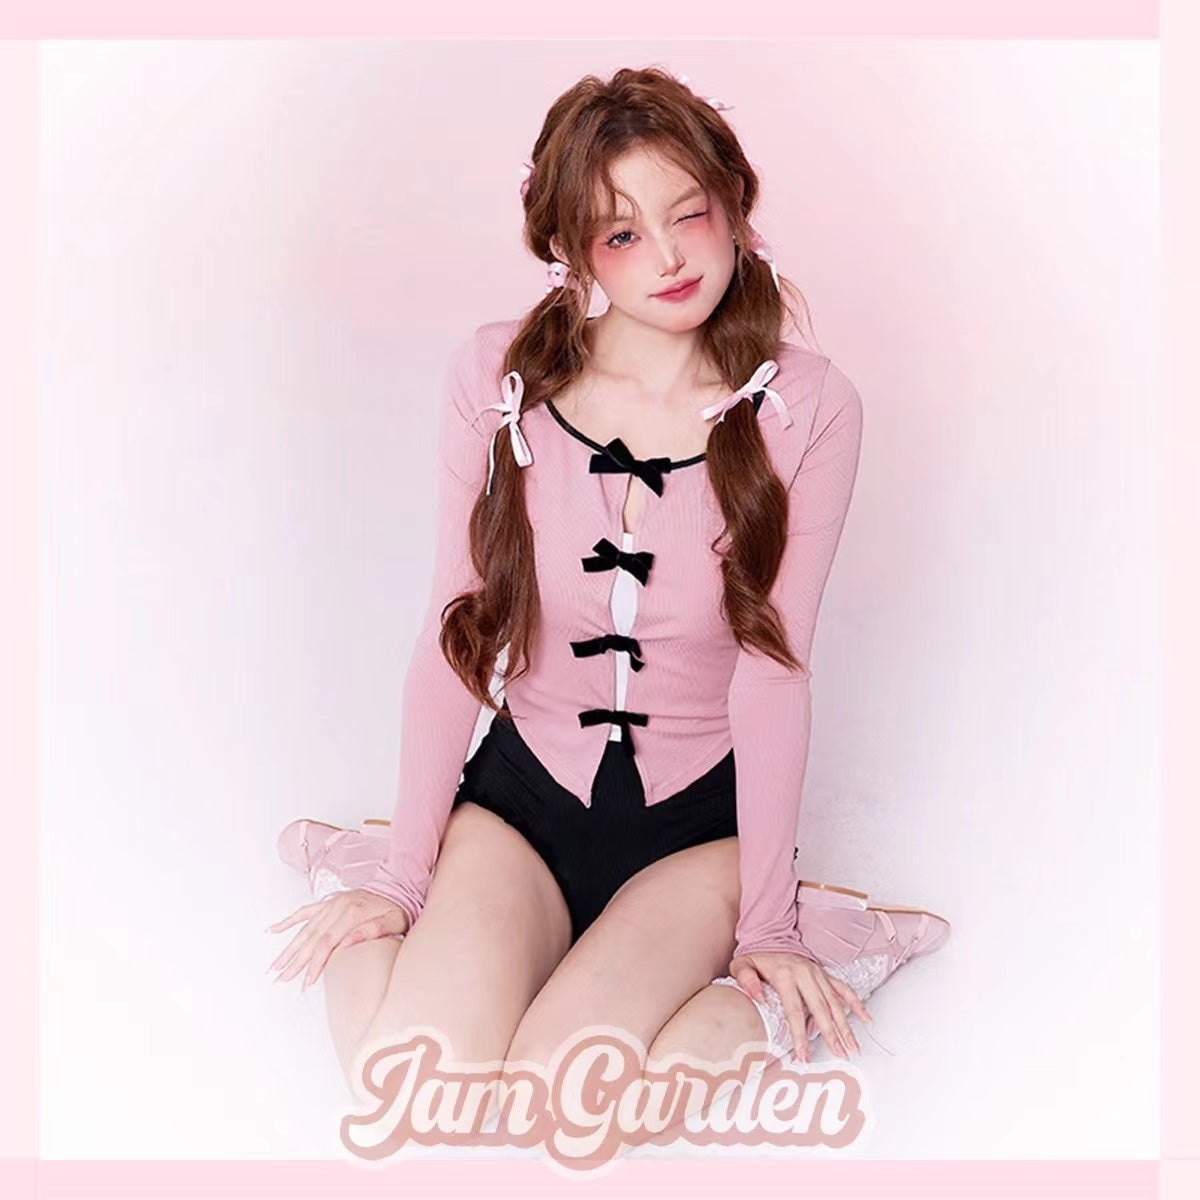 Ballet Girl Swimsuit New One-Piece Conservative Long-Sleeved Bowknot Blouse Hot Spring Vacation - Jam Garden